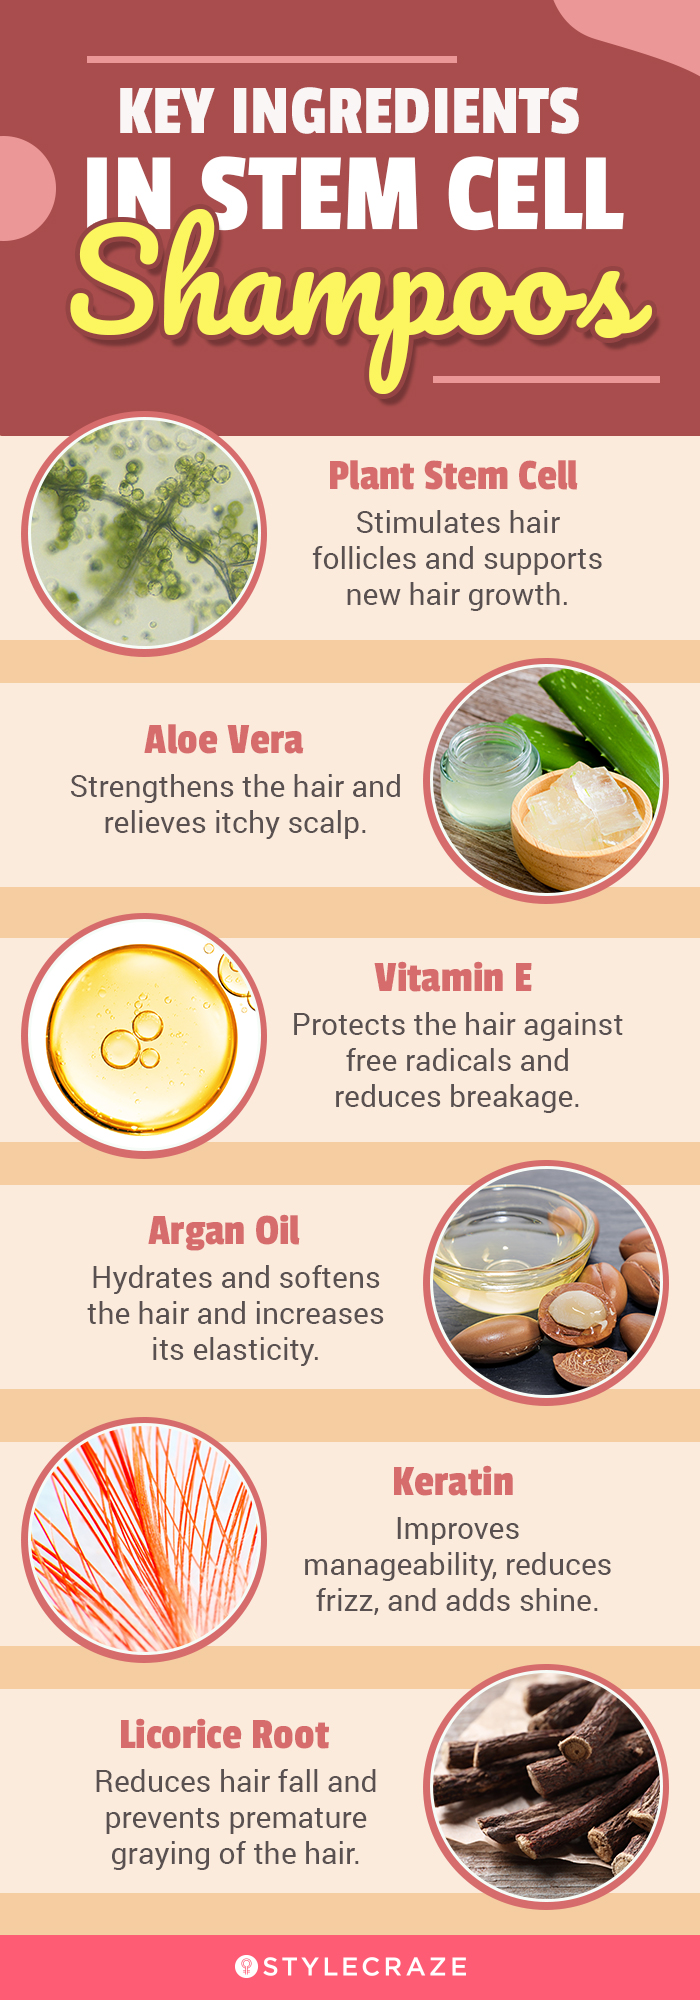 Key Ingredients In Stem Cell Shampoos (infographic)